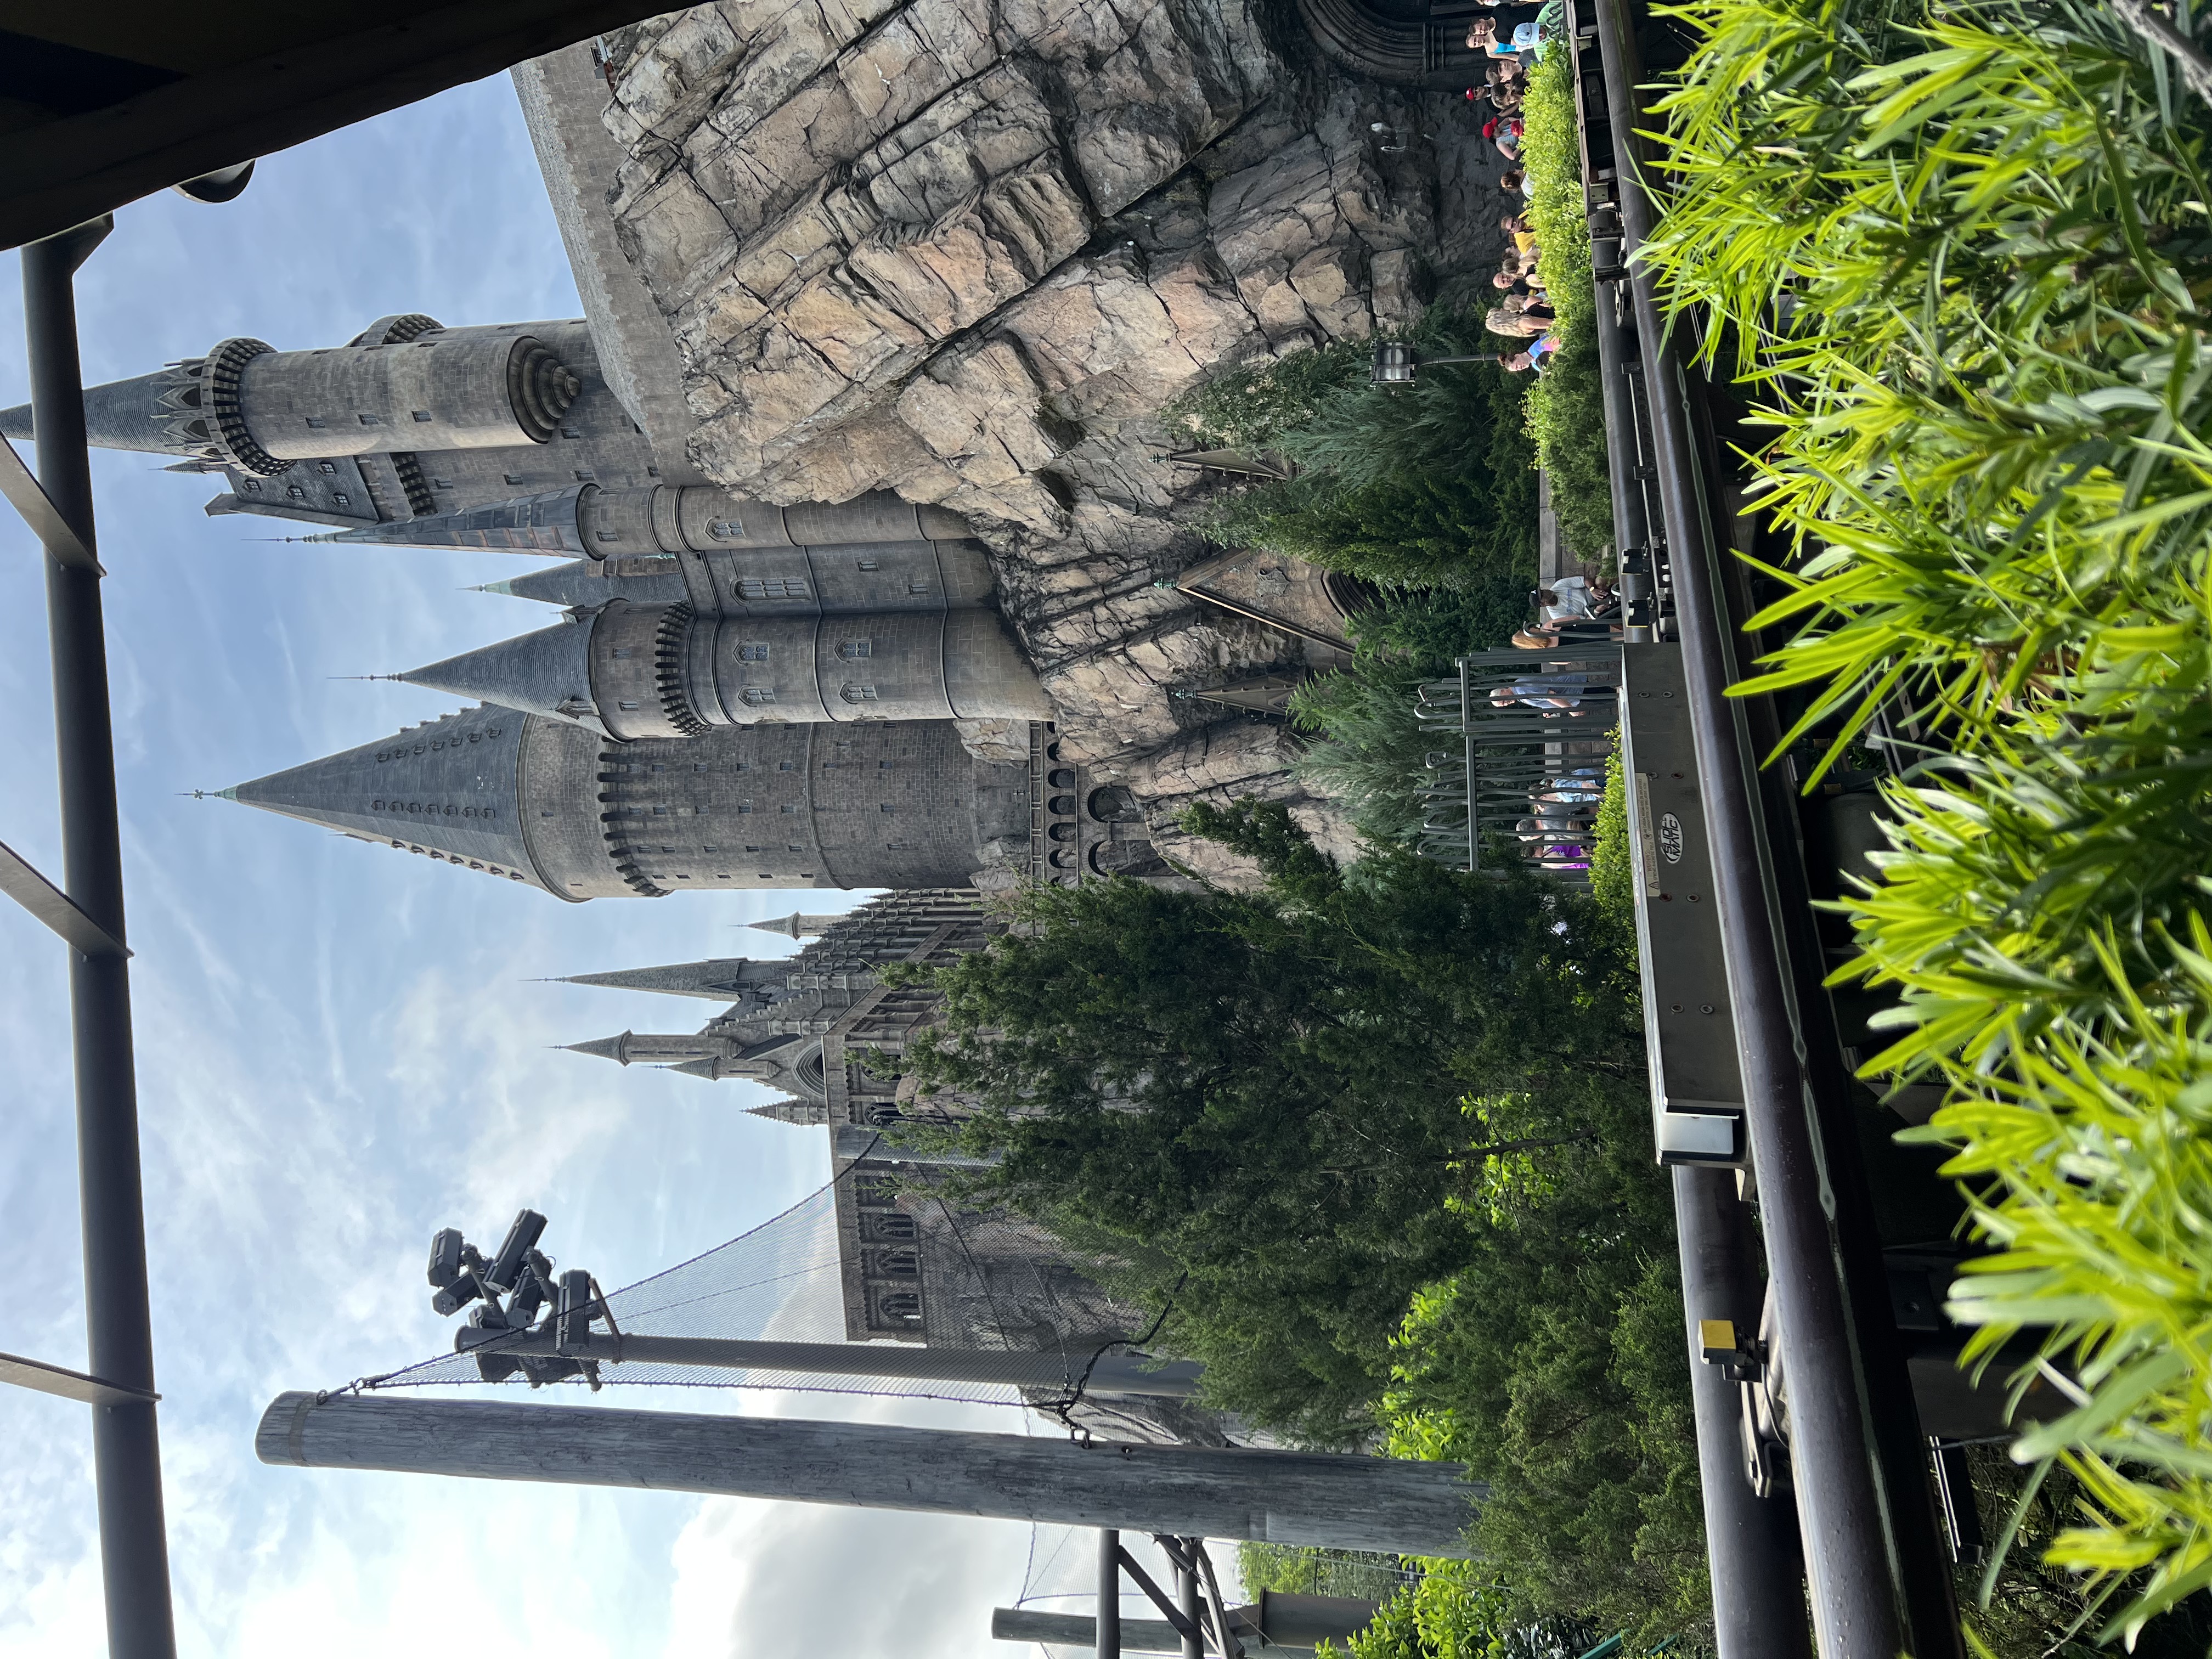 View of Harry Potter and the Forbidden Journey from the line in Flight of the Hippogriff.